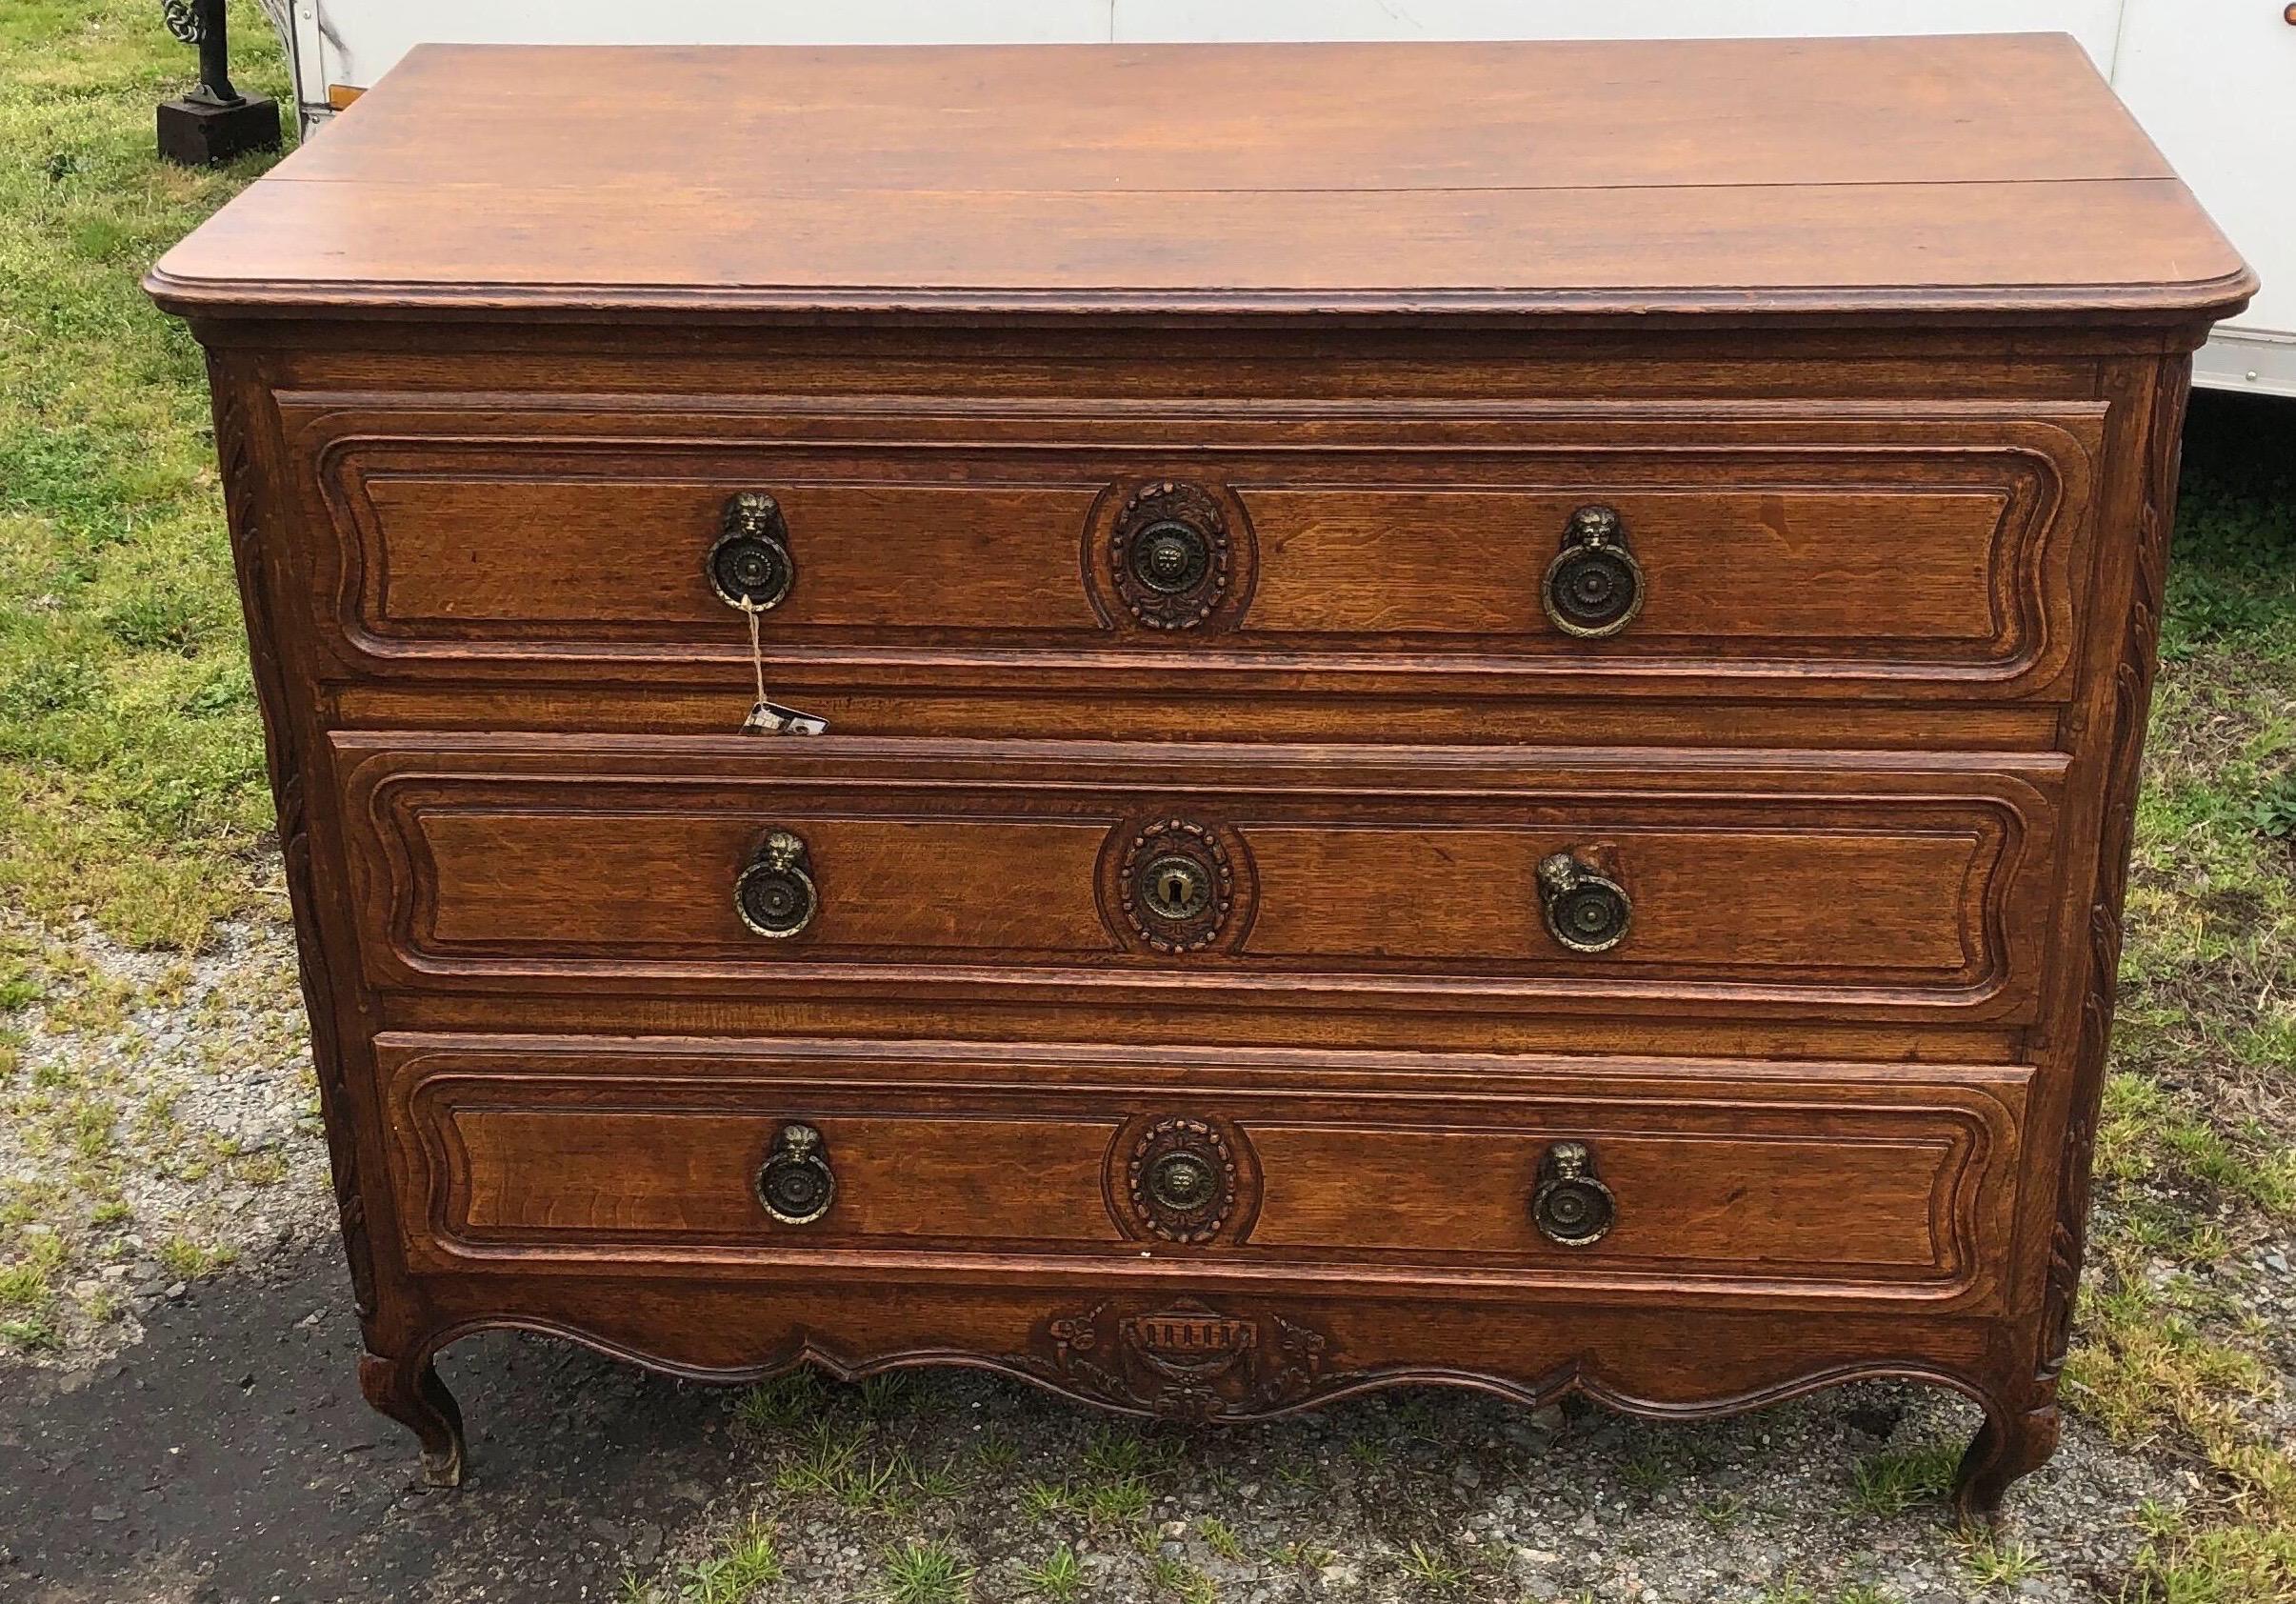 19th century French Provincial oak commode with three drawers, carved knees and feet and three board top.